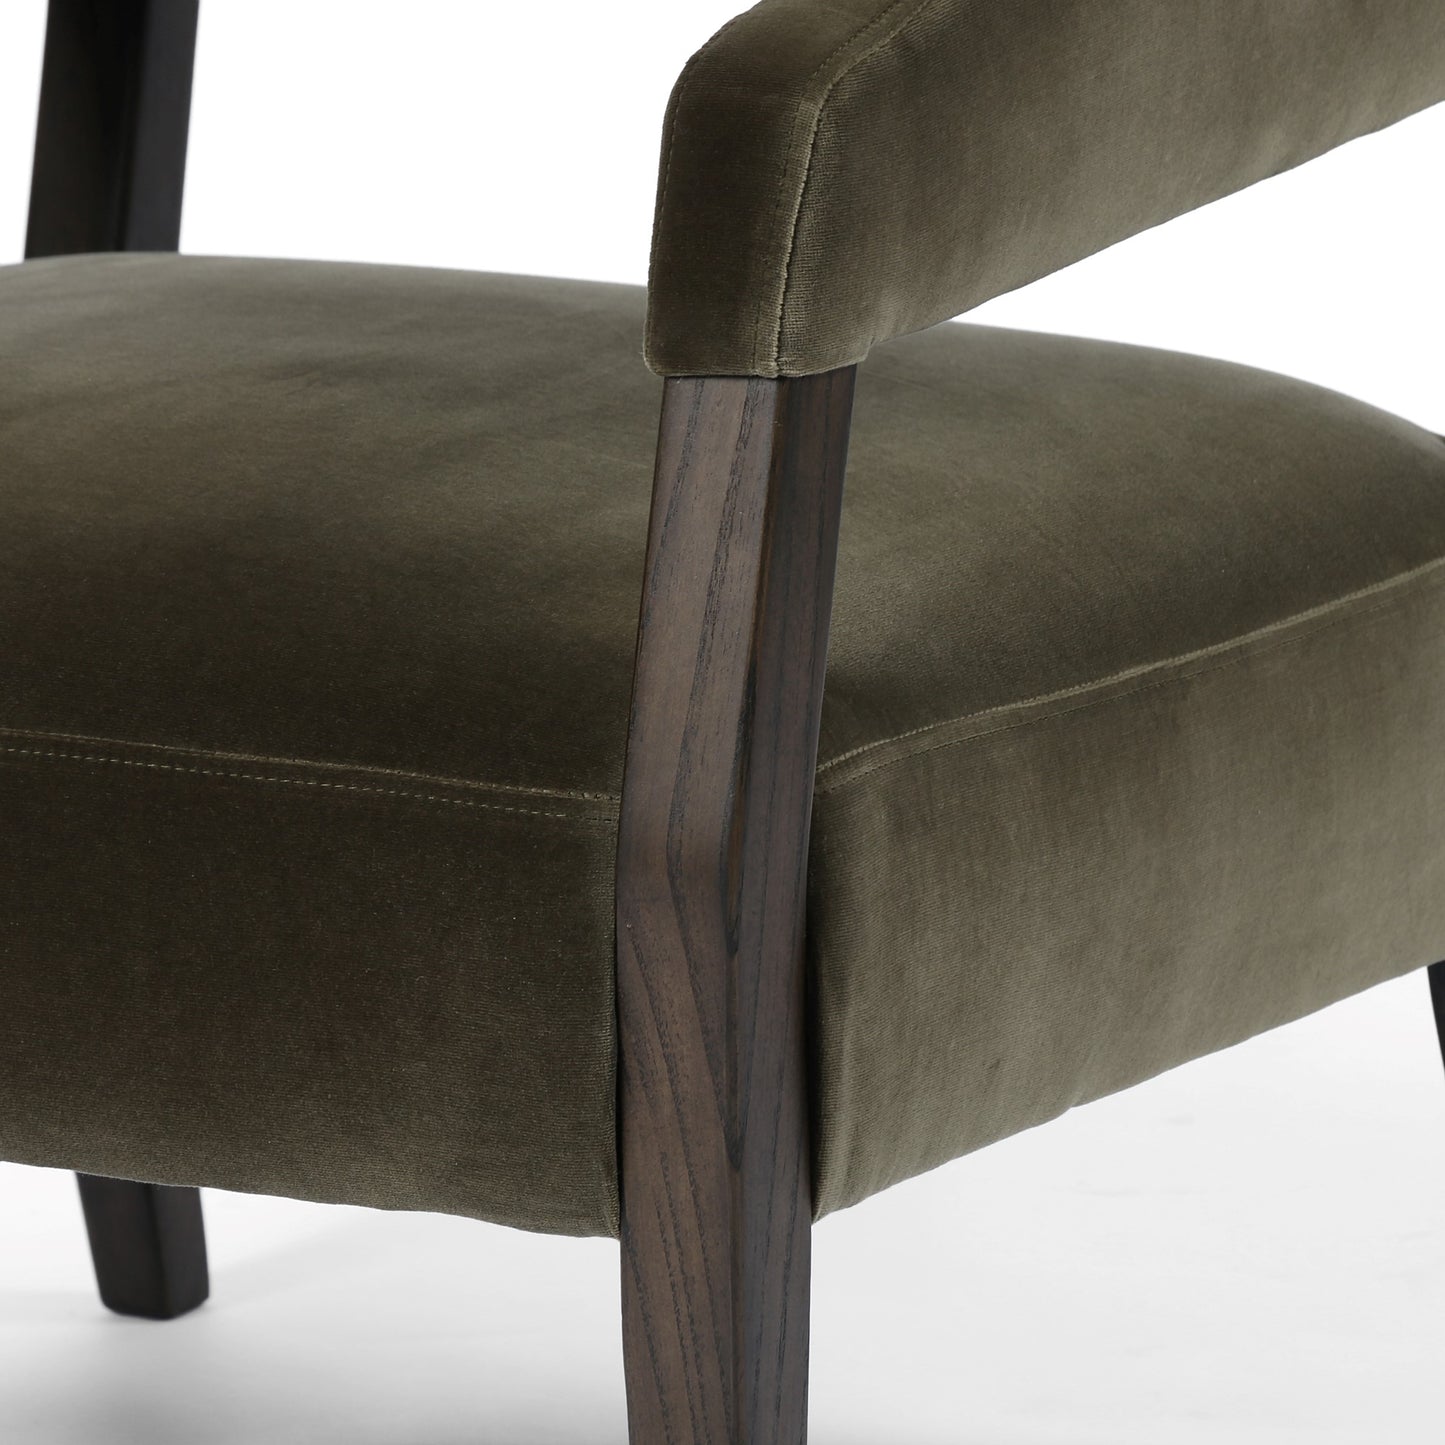 four hands gary club chair olive green cushion and wood detail